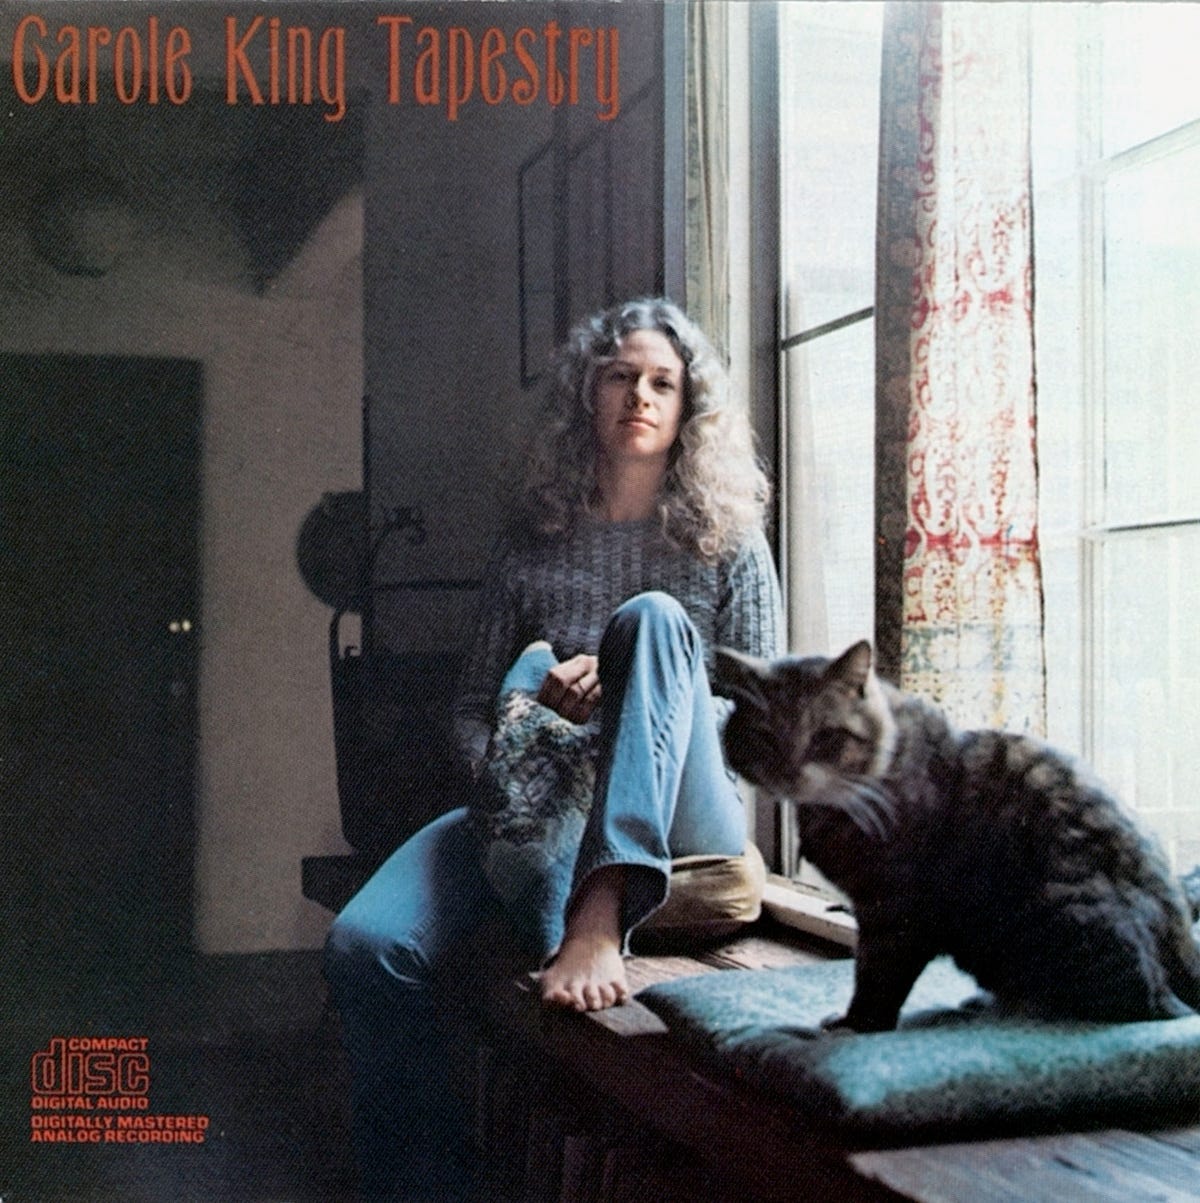 Carole King rock album 'Tapestry' turns 50: Why it matters